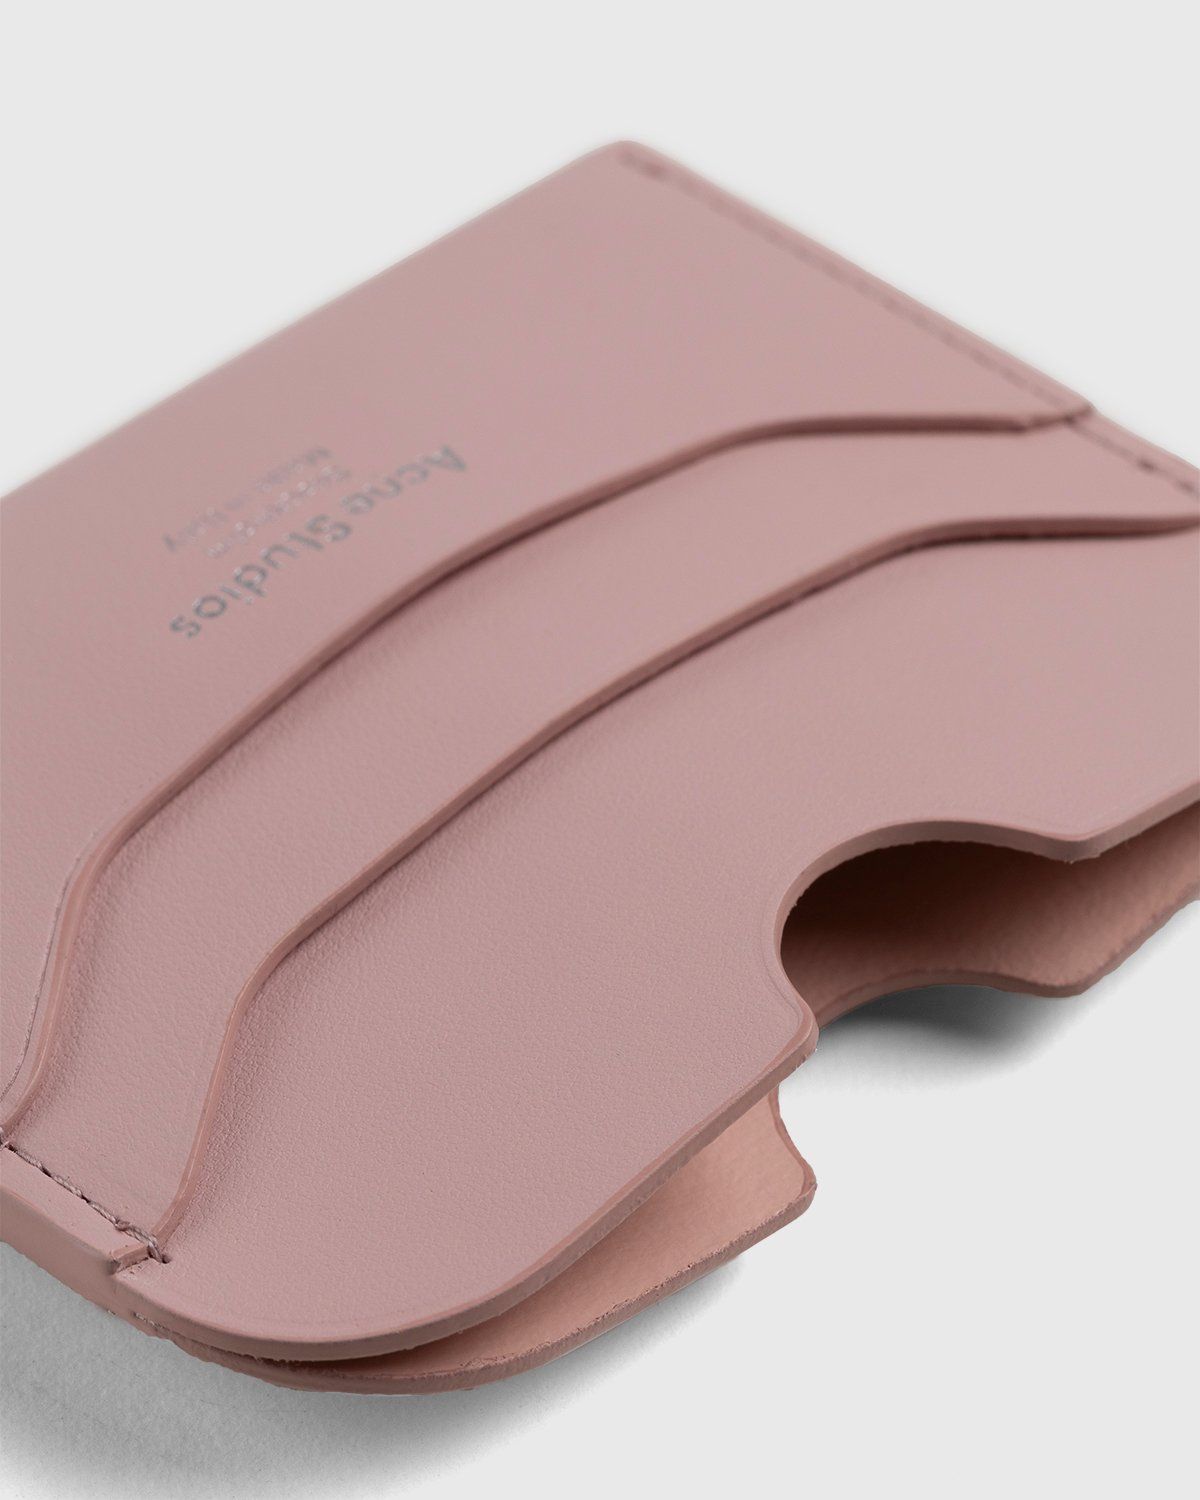 Acne Studios – Leather Card Case Powder Pink - Image 4